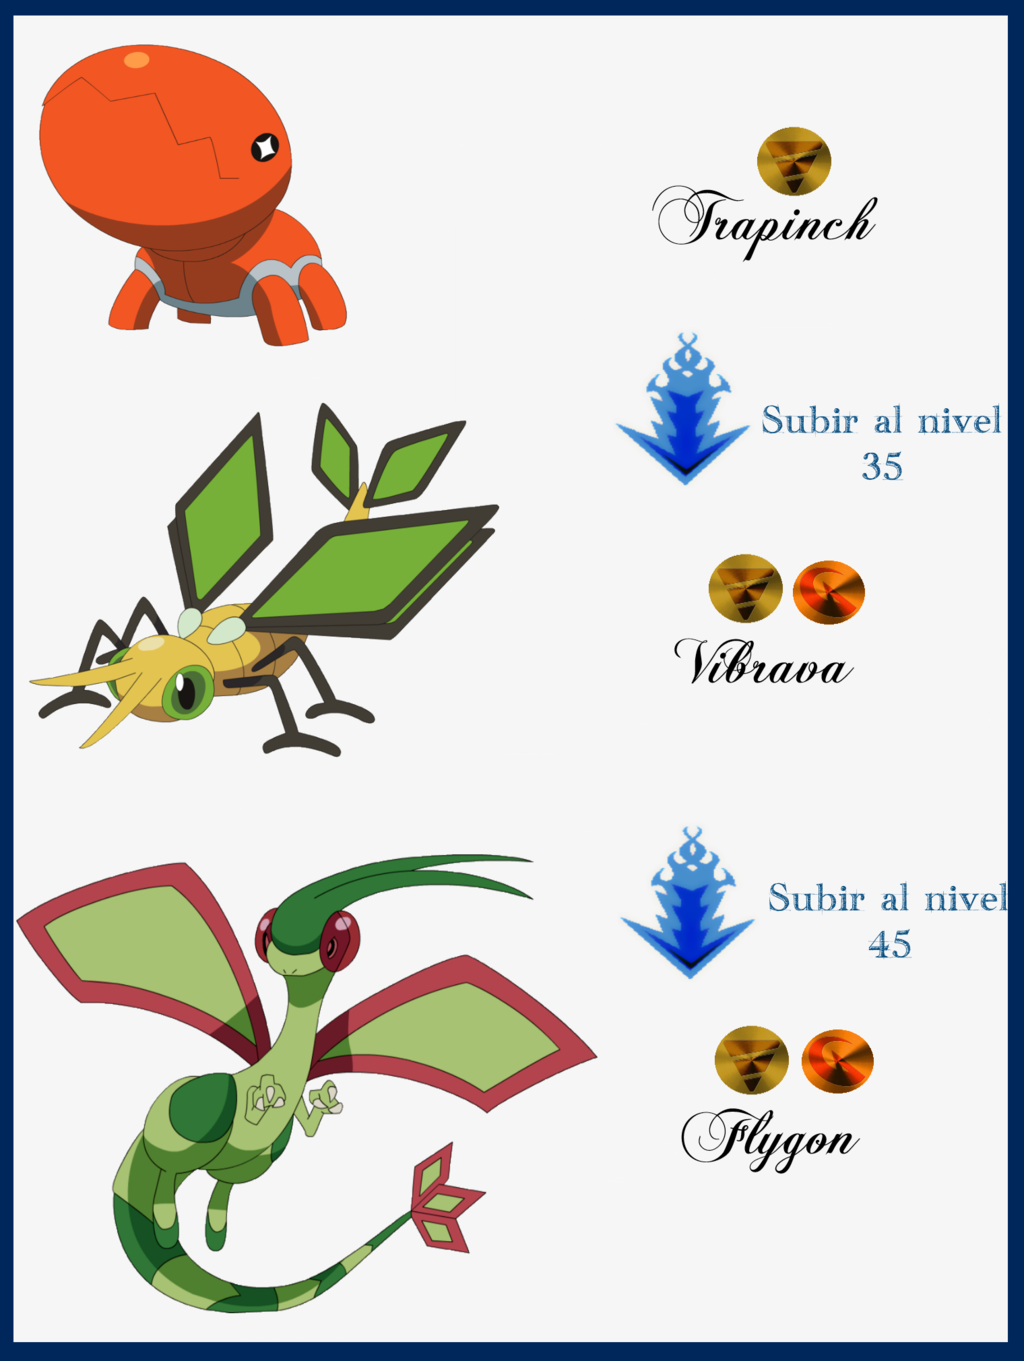 155 Trapinch Evoluciones by Maxconnery on DeviantArt